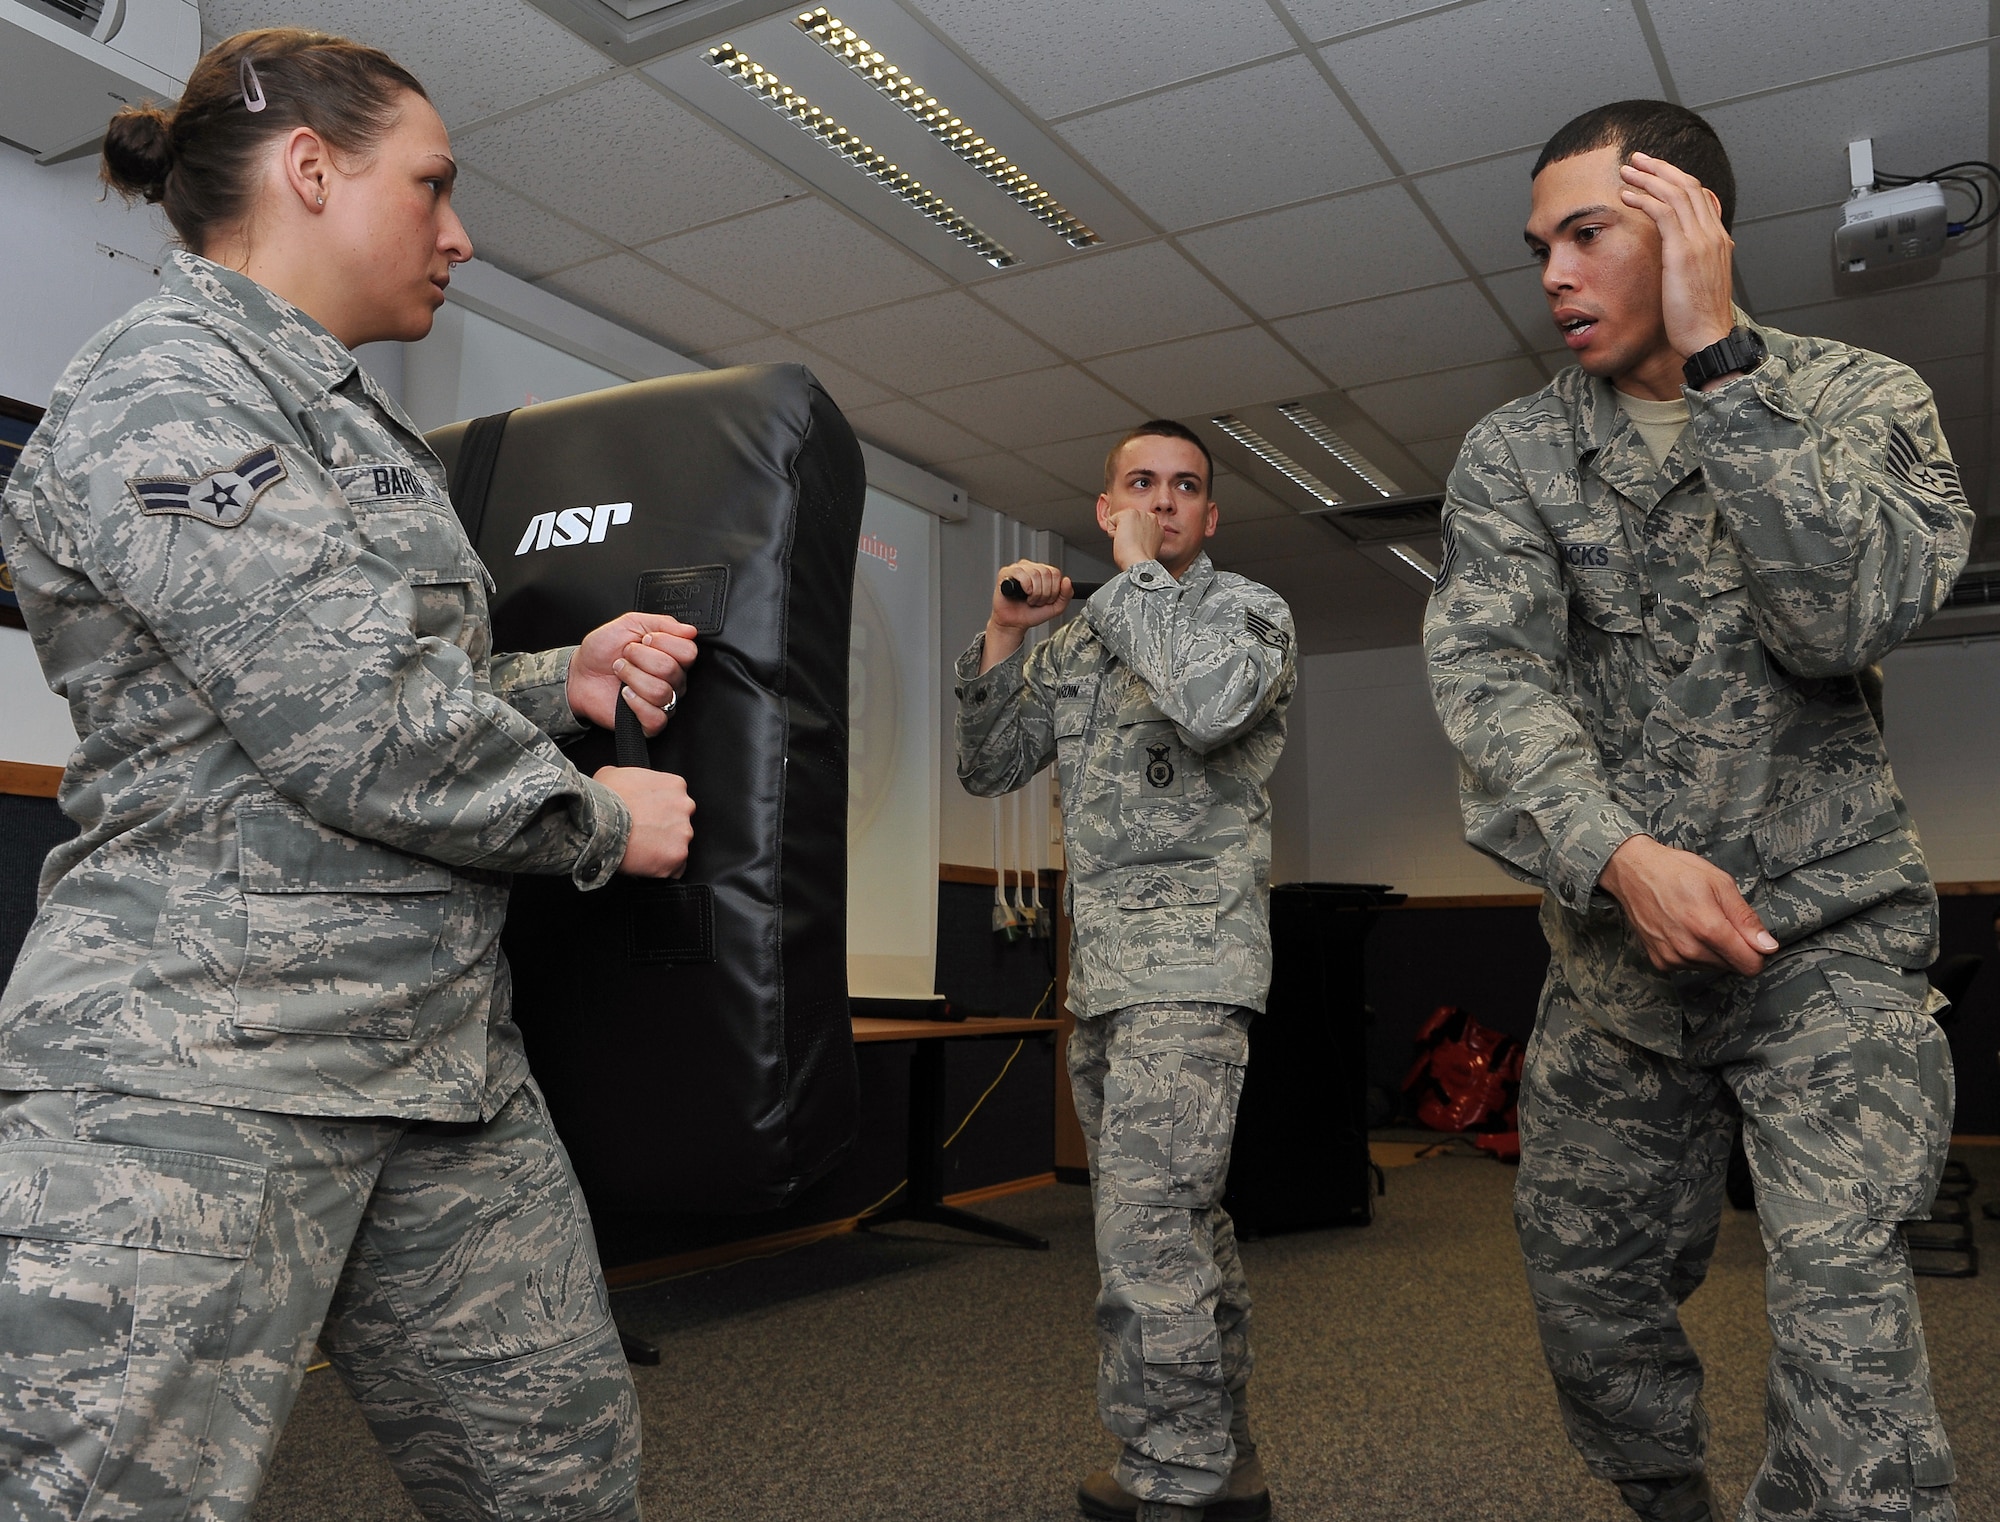 Tech. Sgt. Christopher Ricks, (right) 86th Security Forces Squadron instructor, teaches proper technique when utilizing the ASP baton to Airman, April 11, 2013, Ramstein Air Base, Germany. 86th SFS and the 569th U.S. Forces Police Squadron came together to train Airmen in verbal judo and certify them on non-lethal weapon training and combatives. (U.S. Air Force photo/Airman 1st Class Dymekre Allen)     